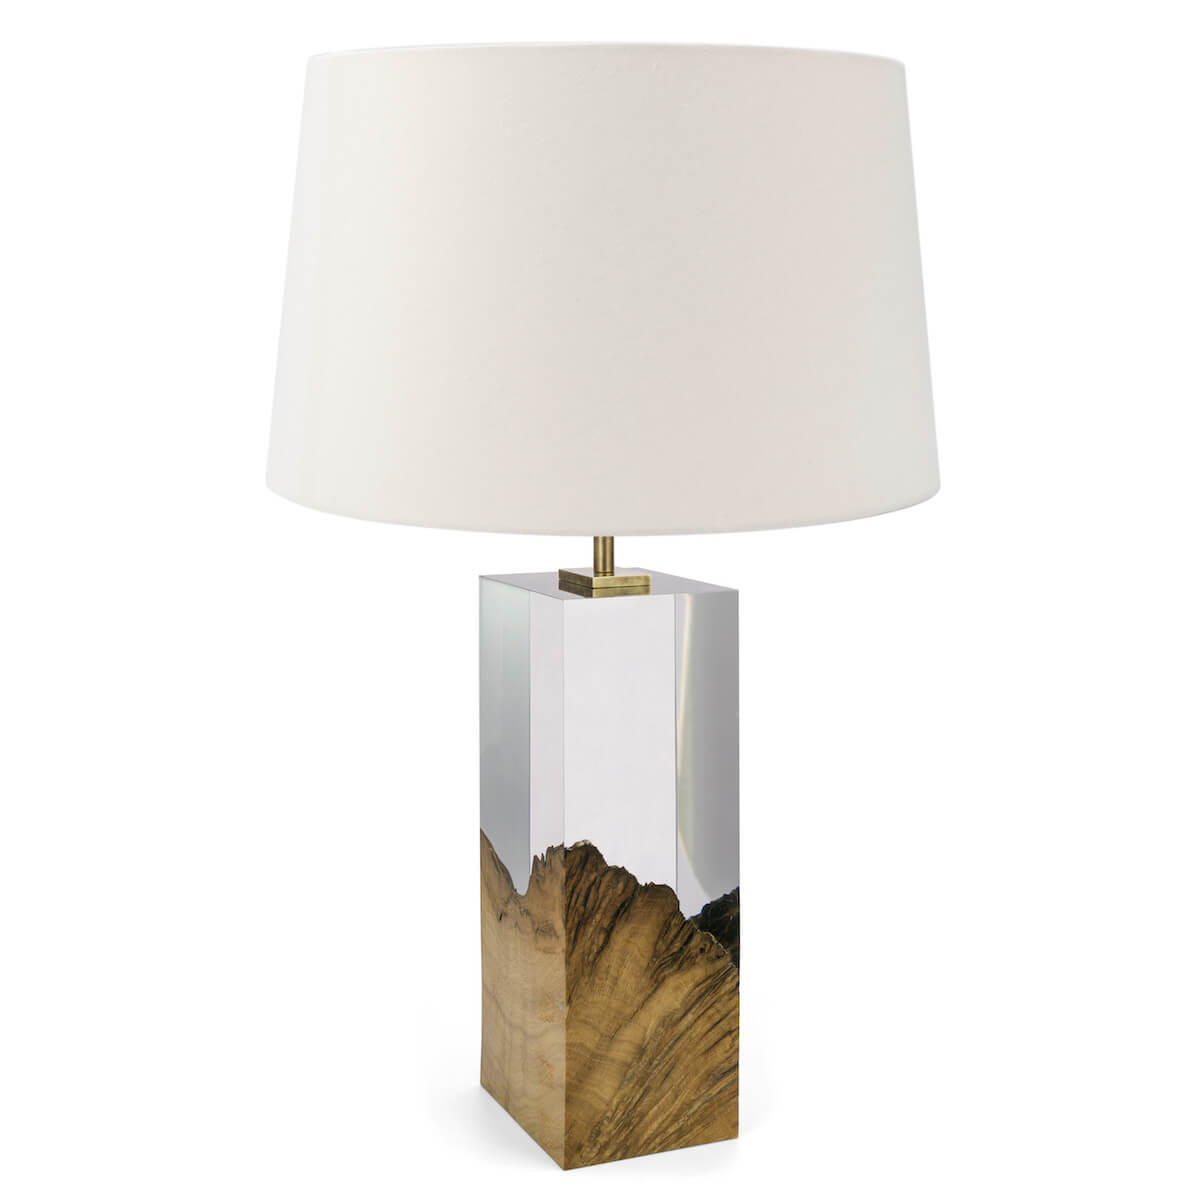 Oak and Acrylic Table Lamp by Iluka London for AUTHOR's collection of British-made luxury homeware